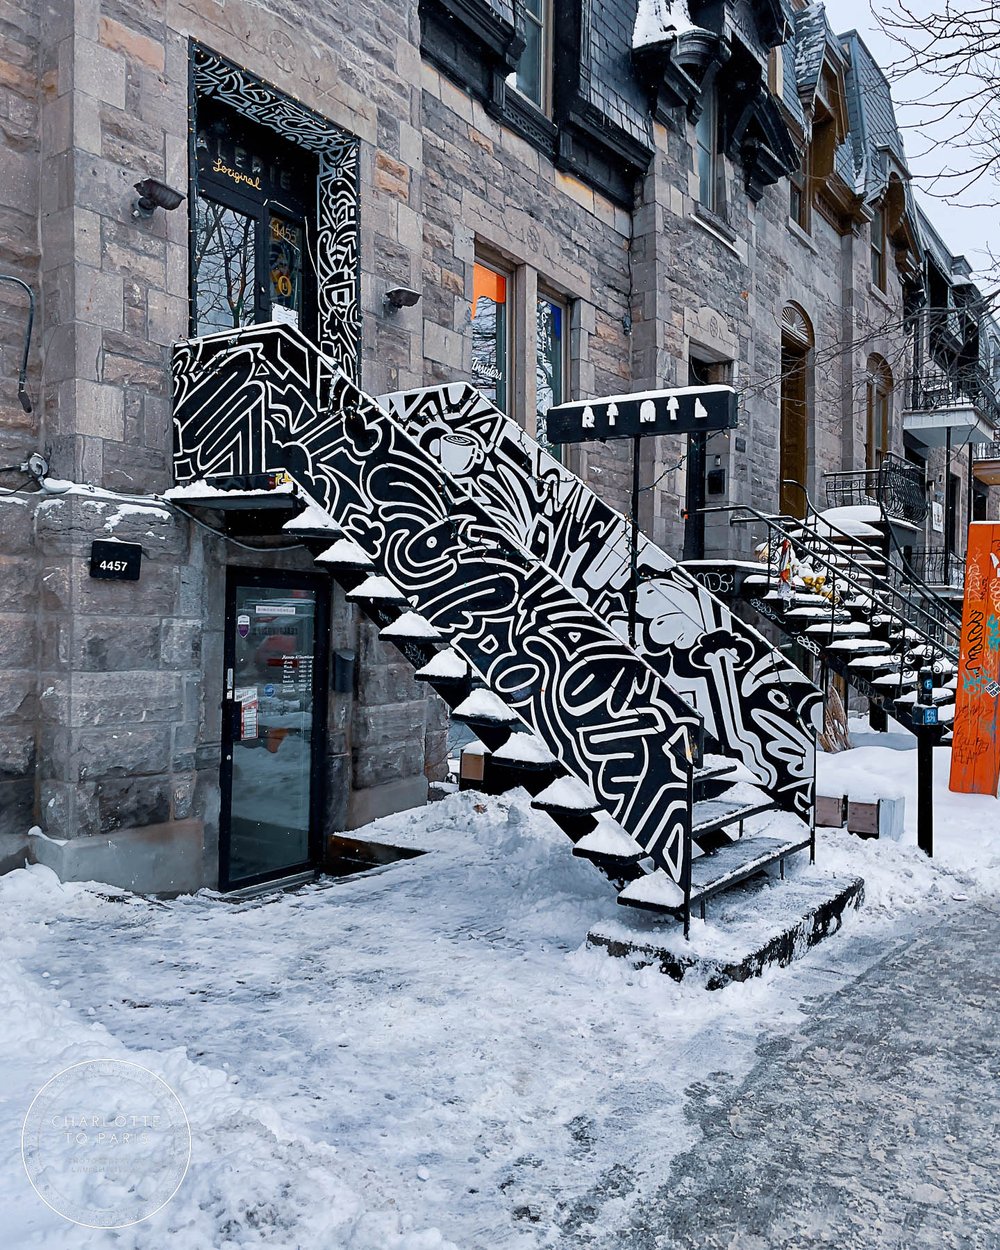 Black and white artist painted stair steps, spotted in the Plateau neighborhood, Montréal